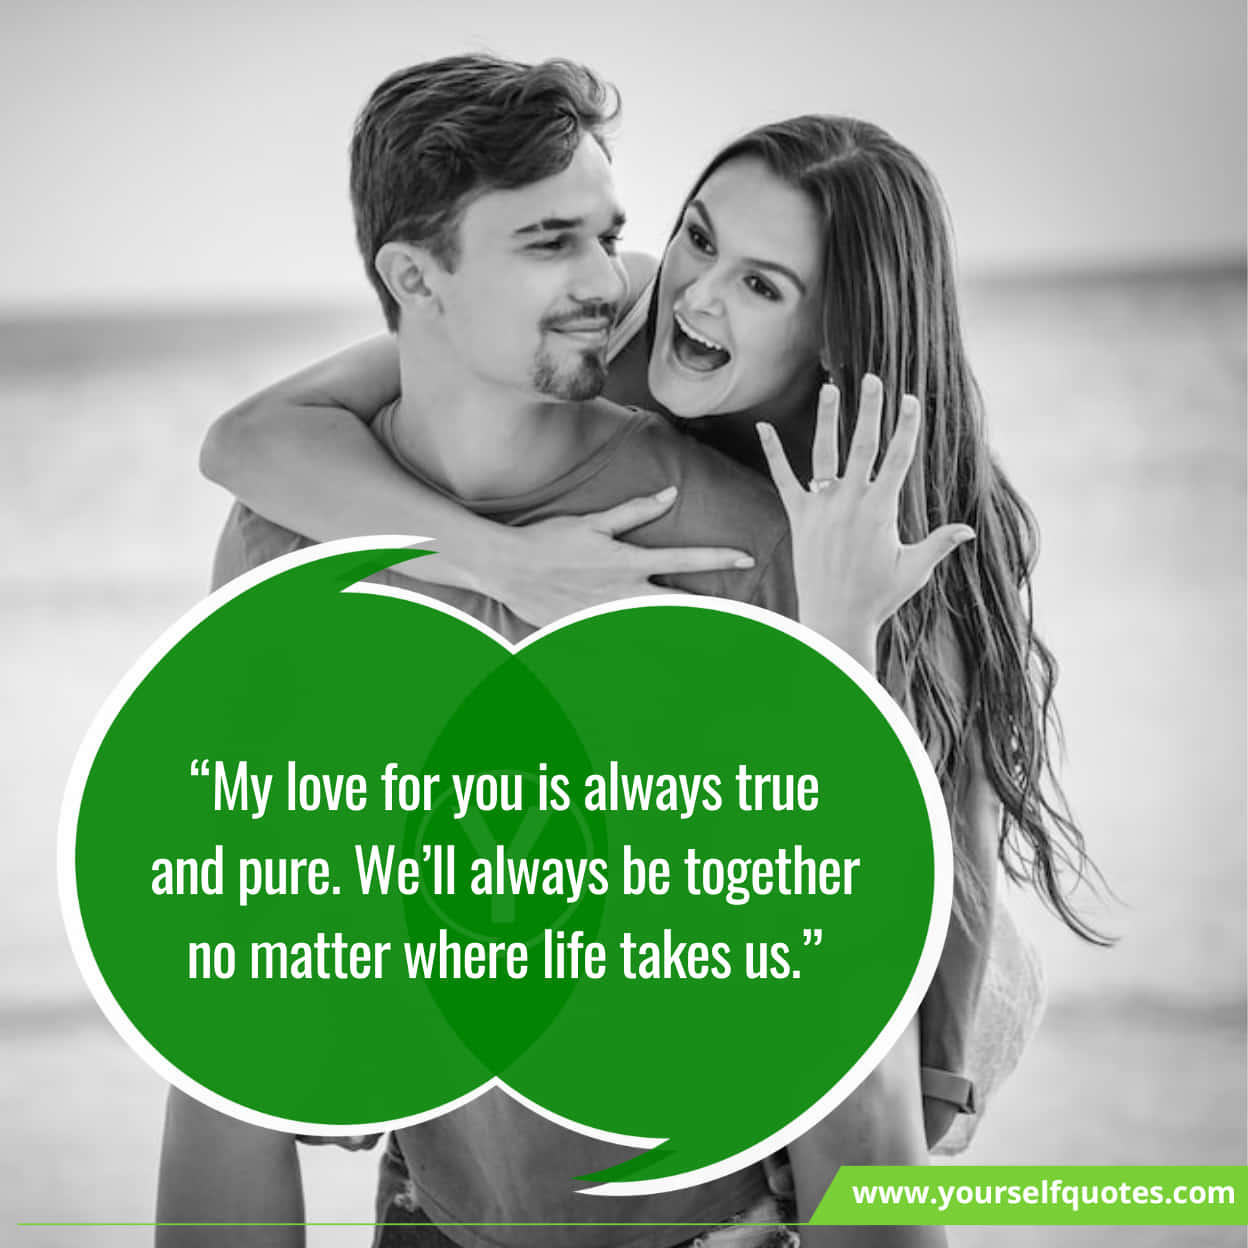 Alluring Love Messages For Him And Her